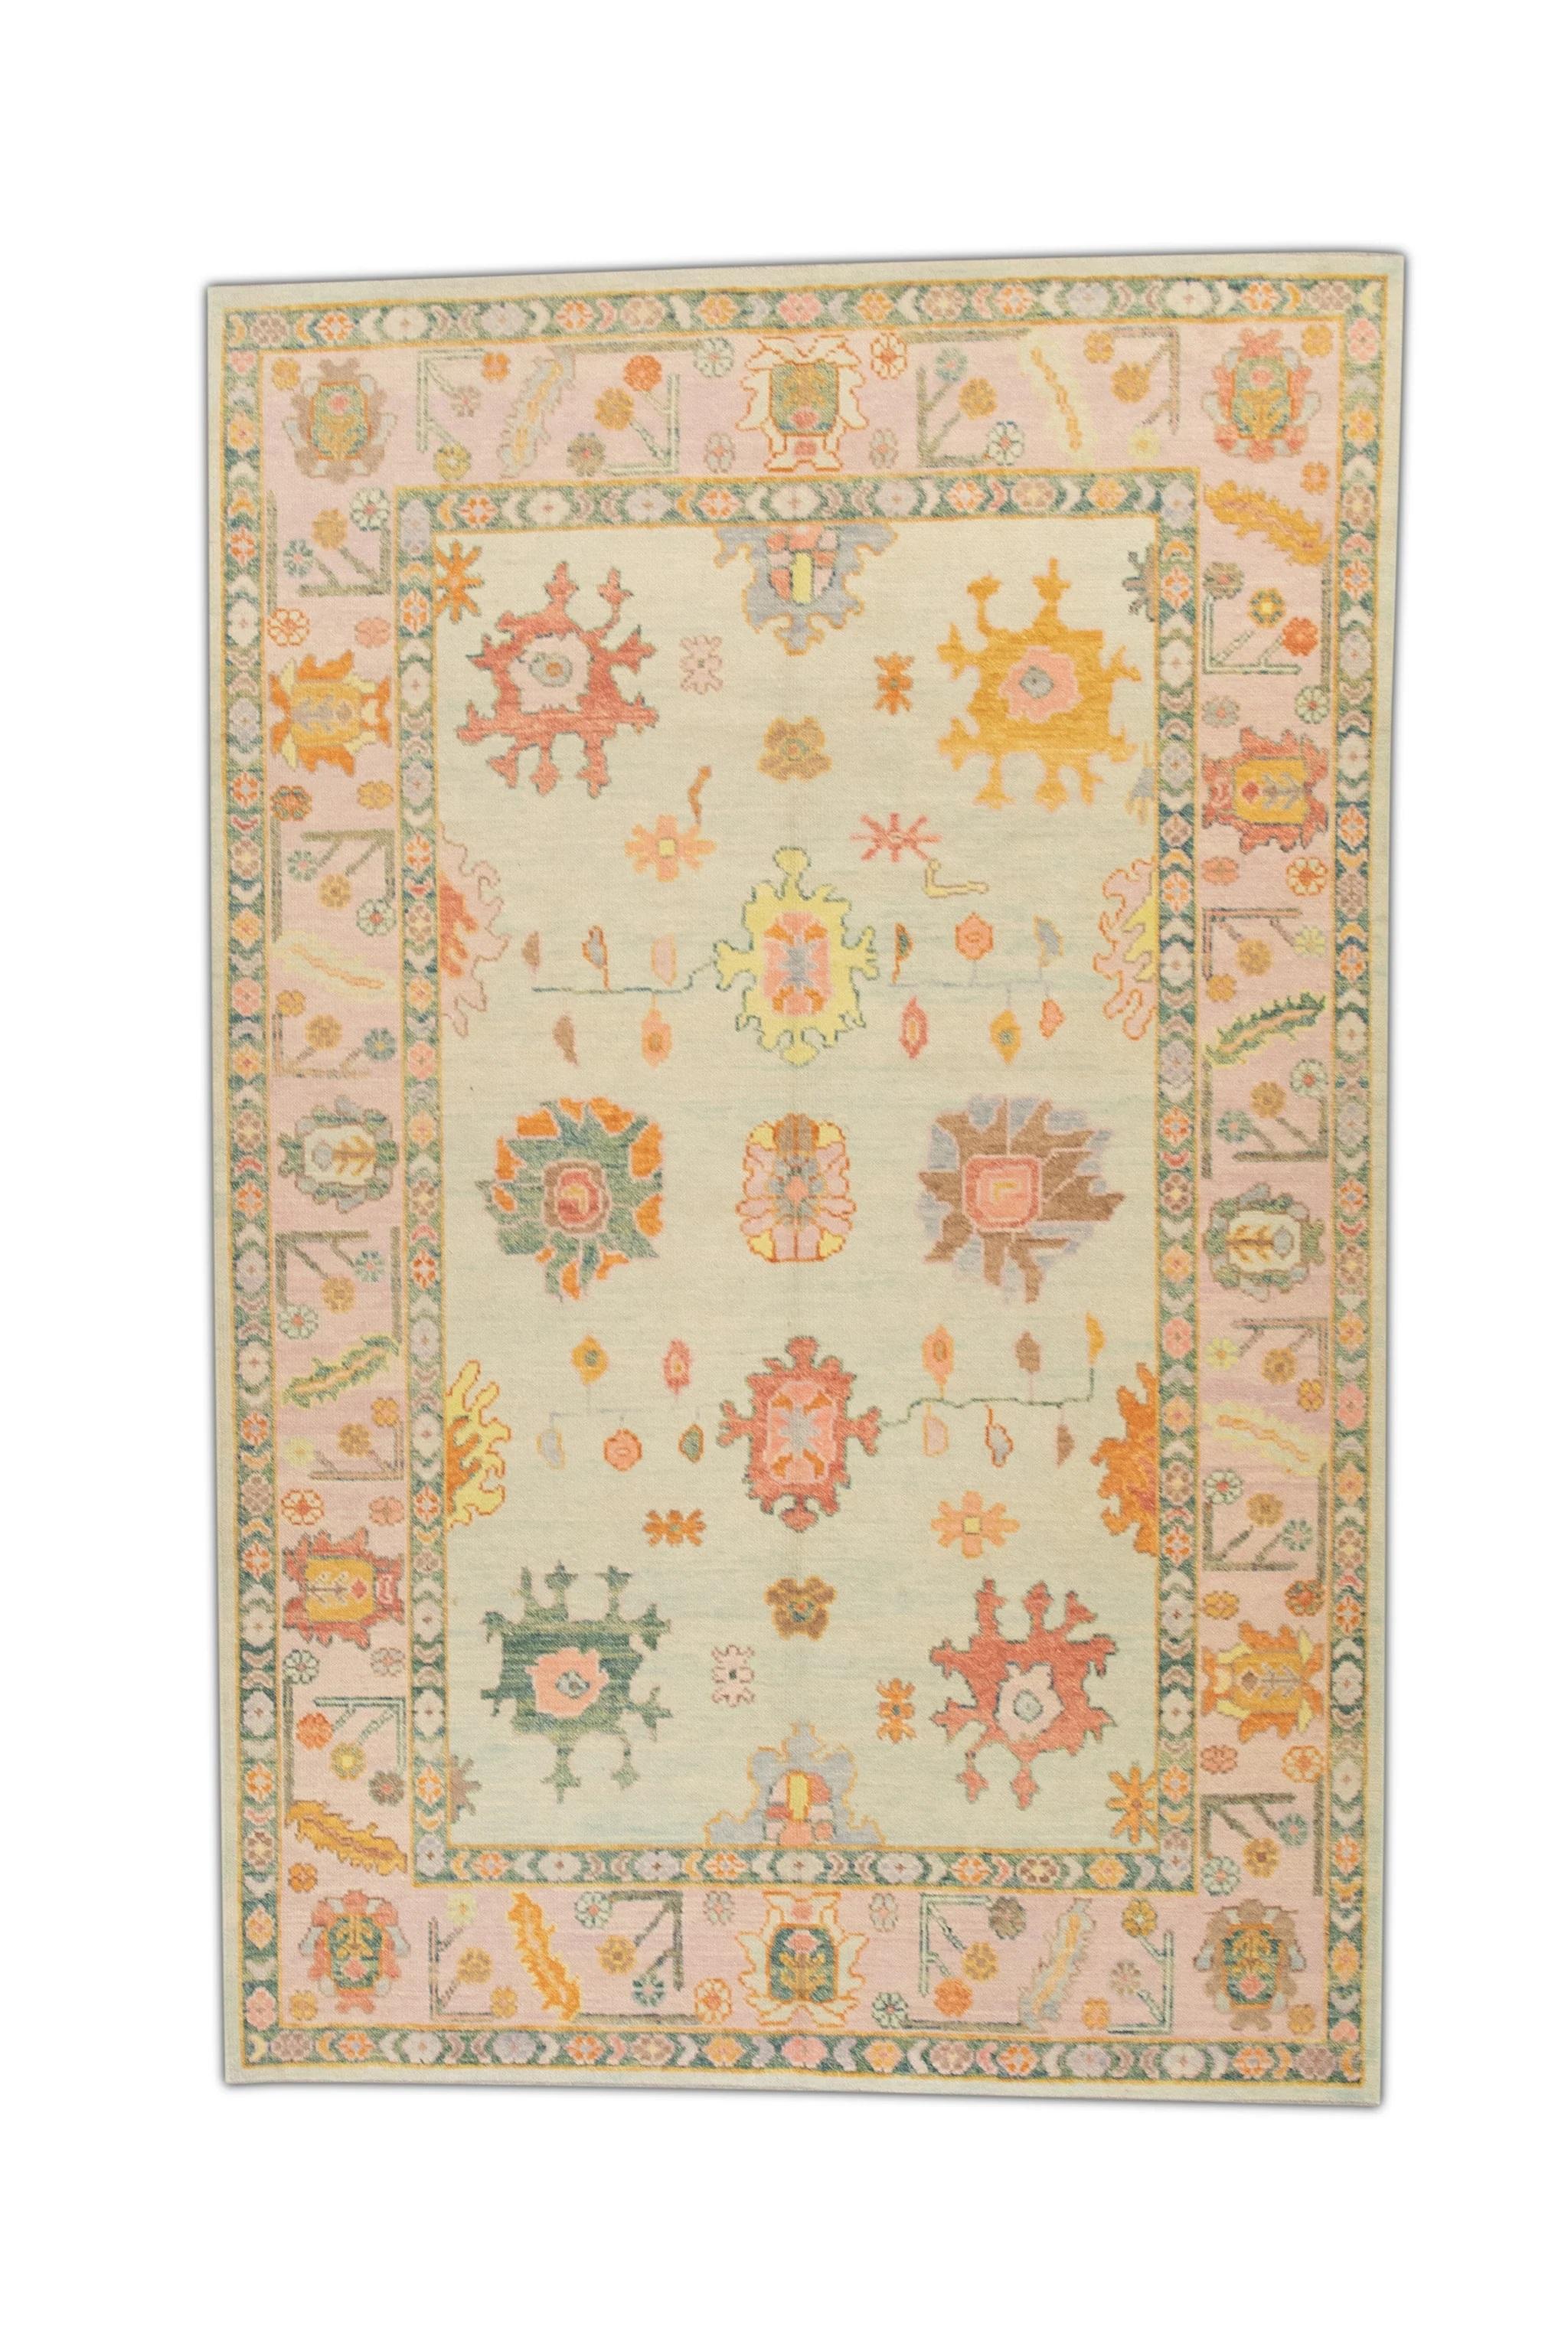 Contemporary Green and Pink Floral Design Handwoven Wool Turkish Oushak Rug 6' x 9'6